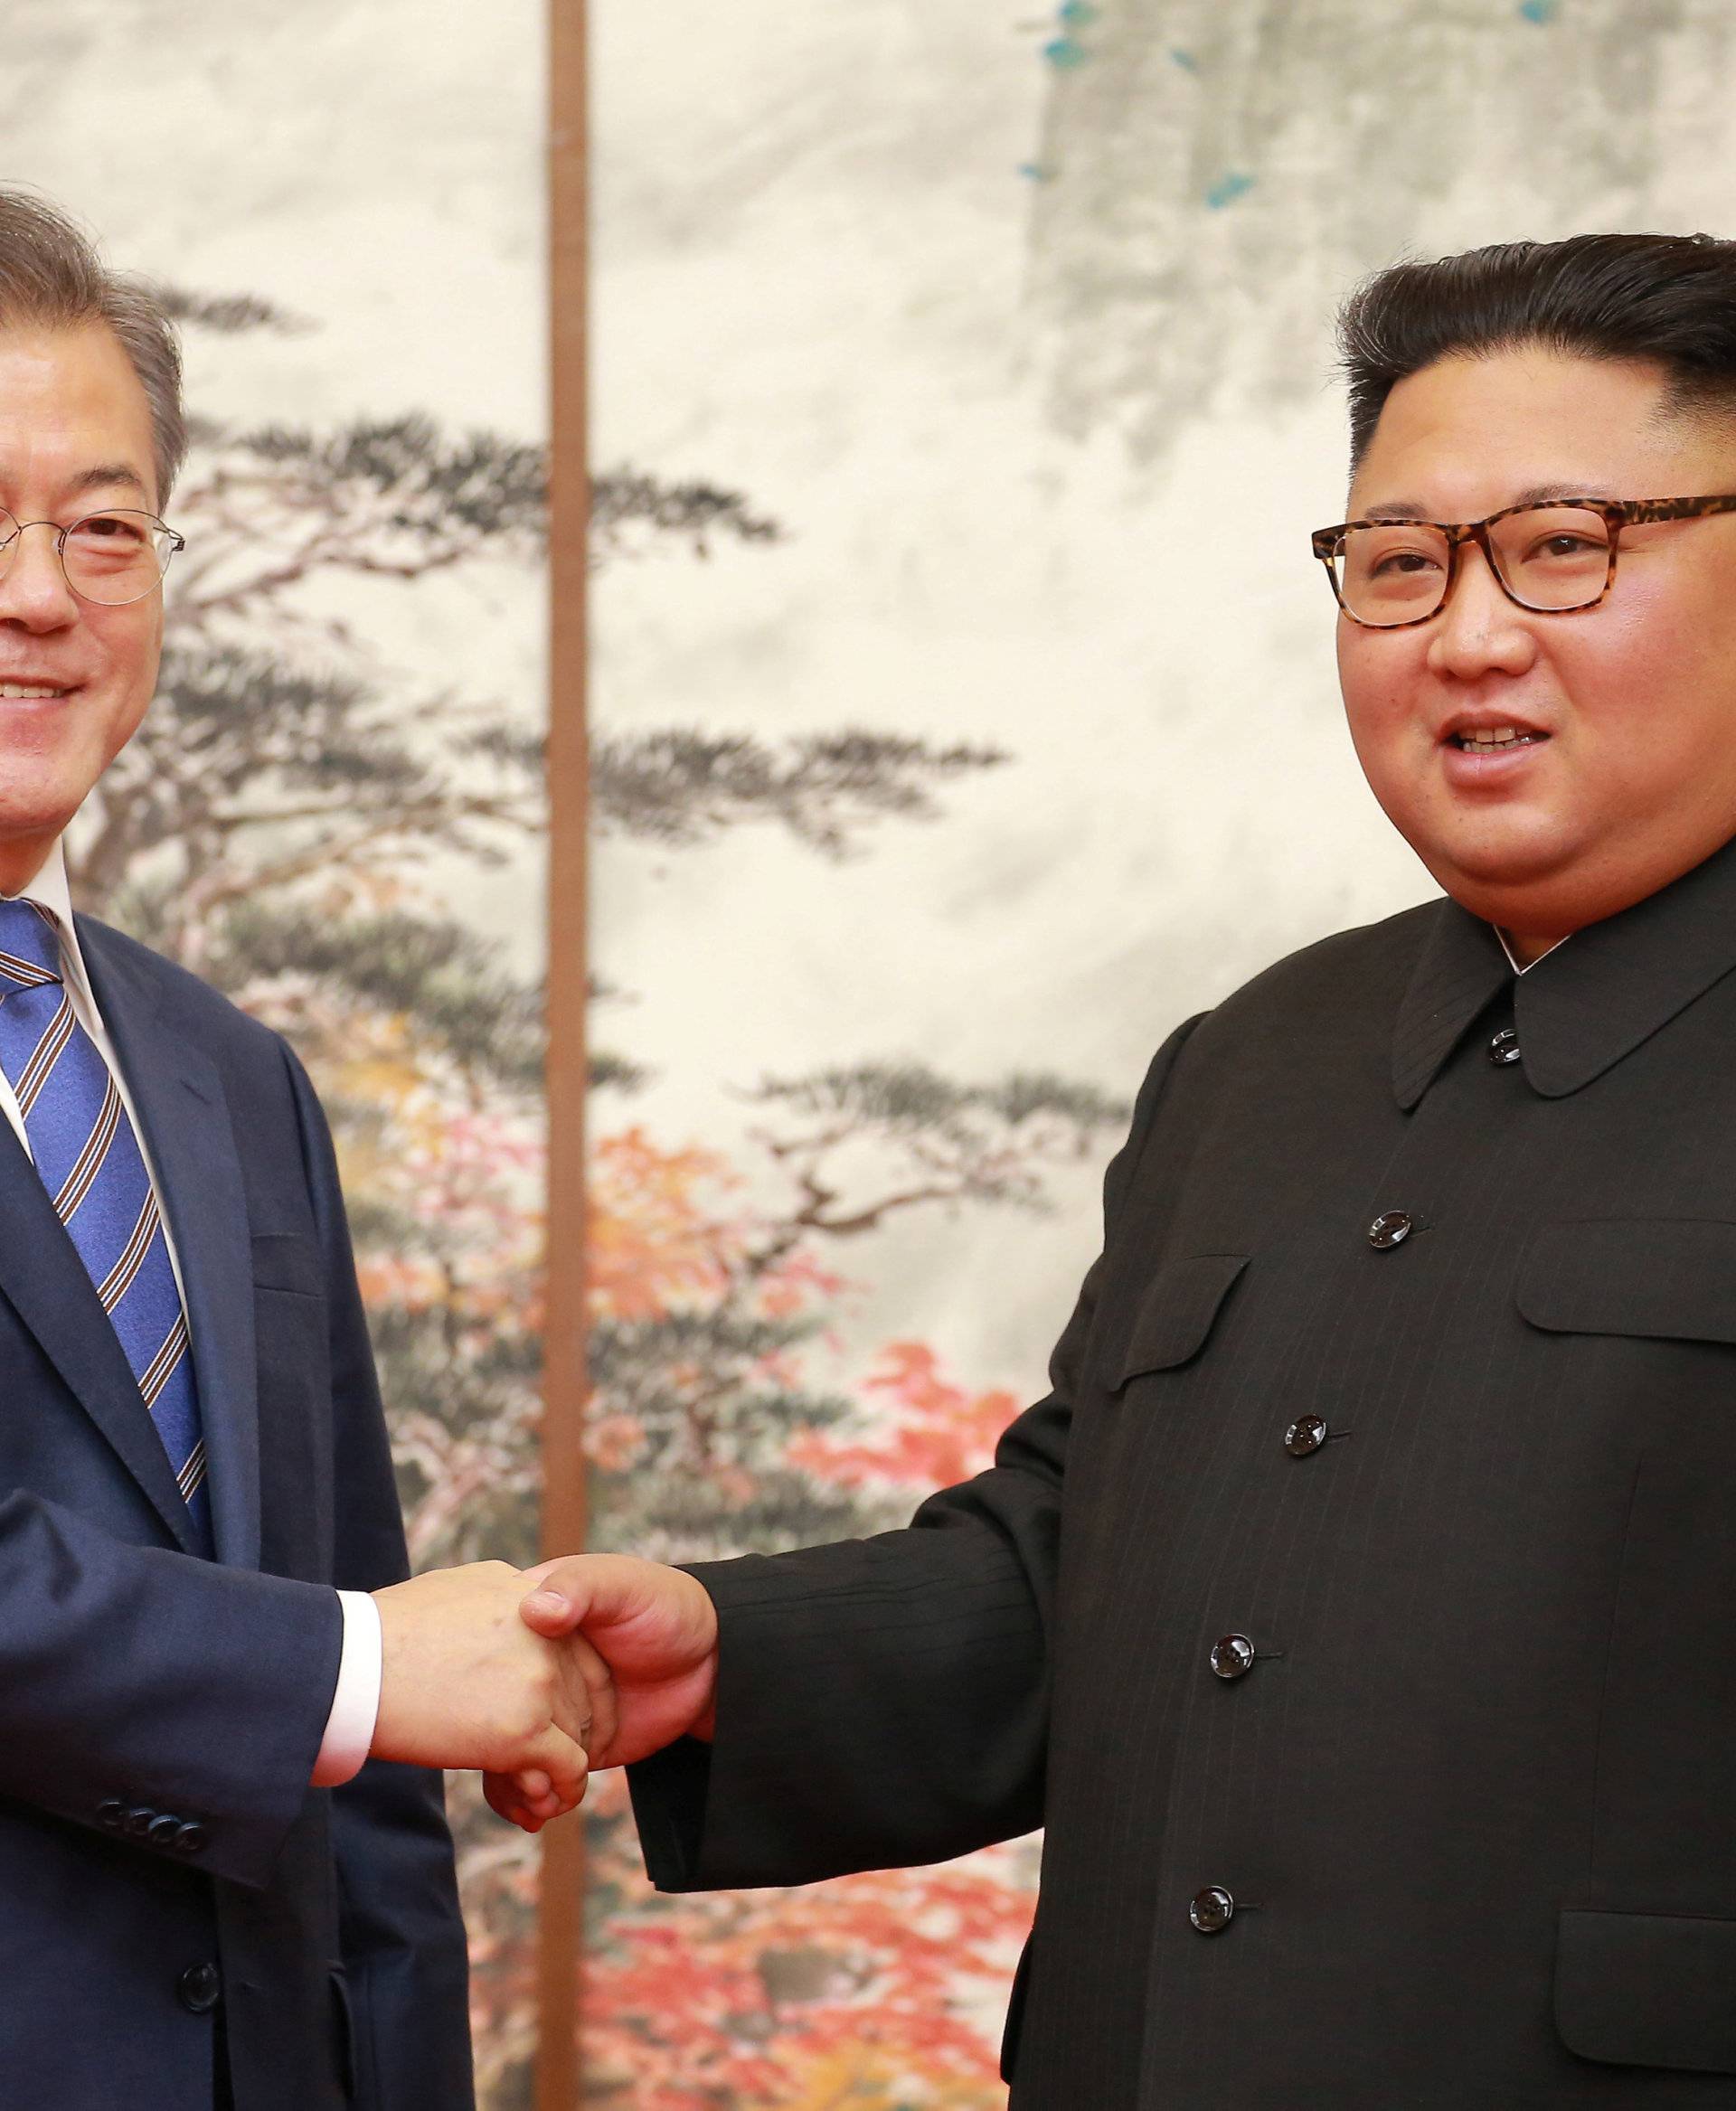 South Korean President Moon Jae-in and North Korean leader Kim Jong Un shake hands during their joint news conference in Pyongyang in this photo released by North Korea's Korean Central News Agency